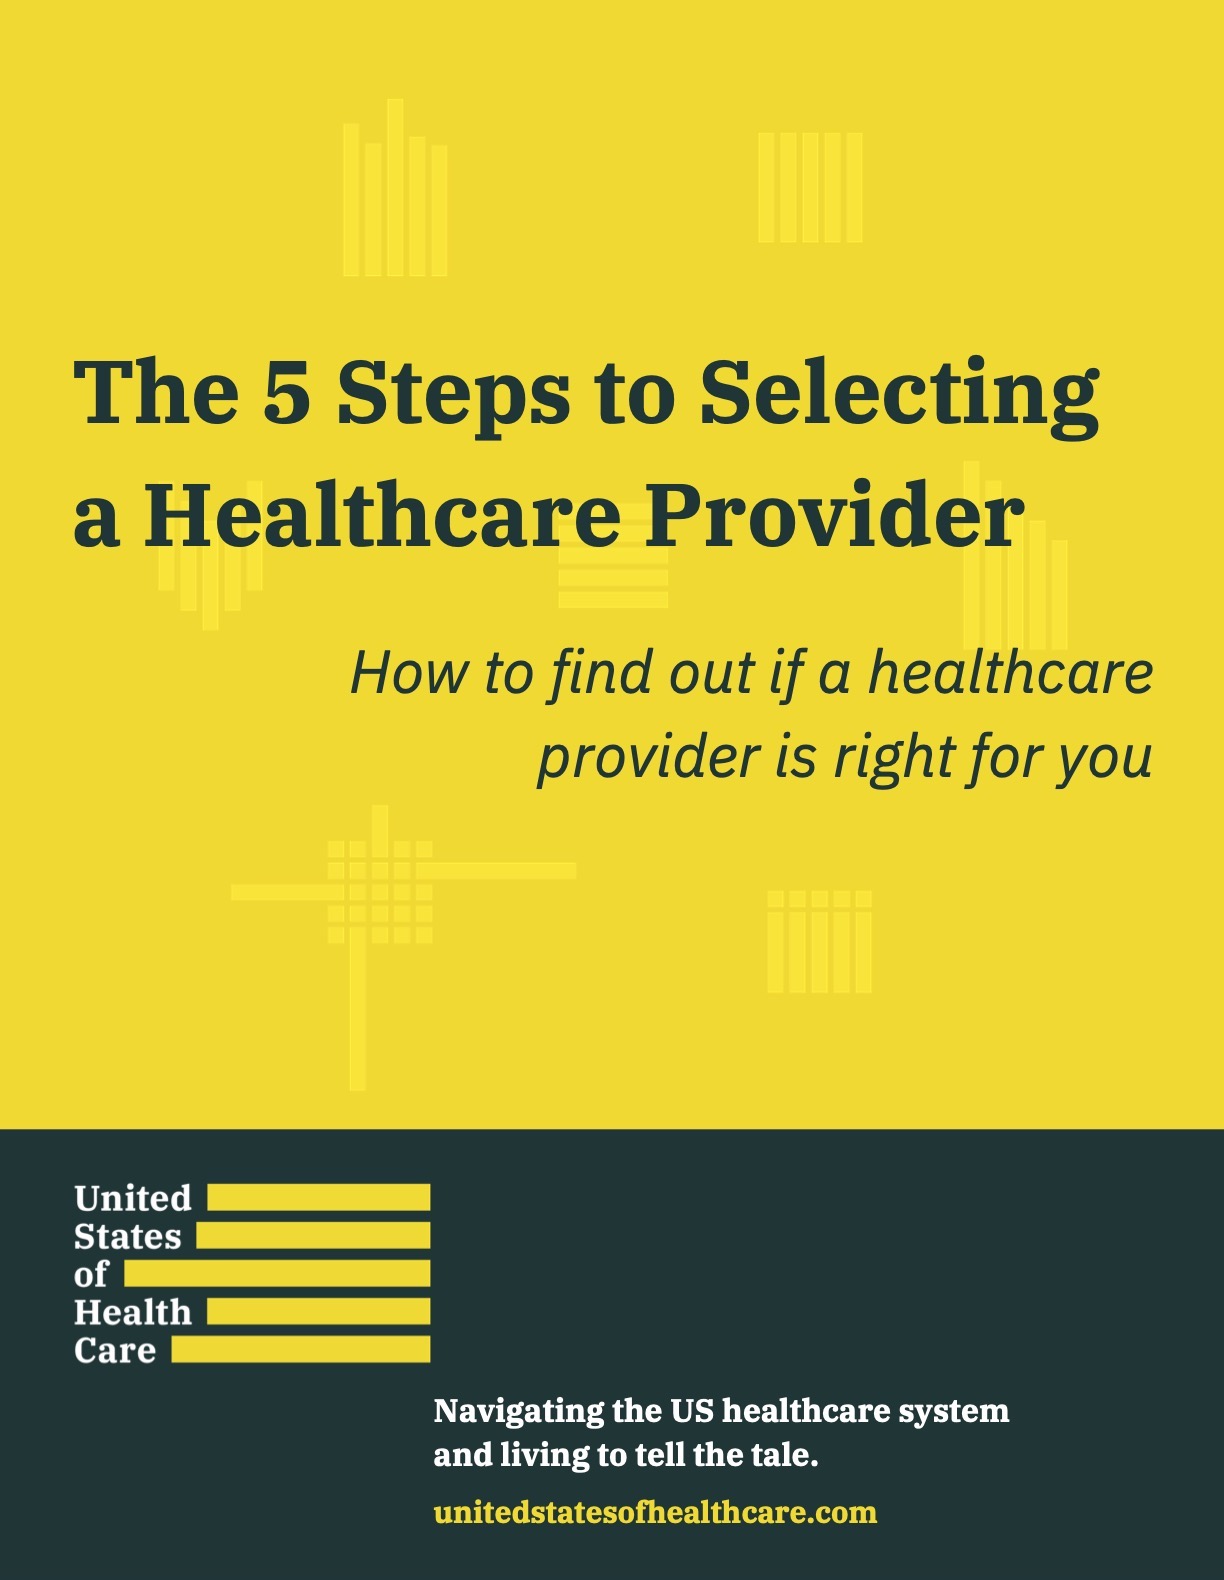 The 5 Steps to Selecting a Healthcare Provider